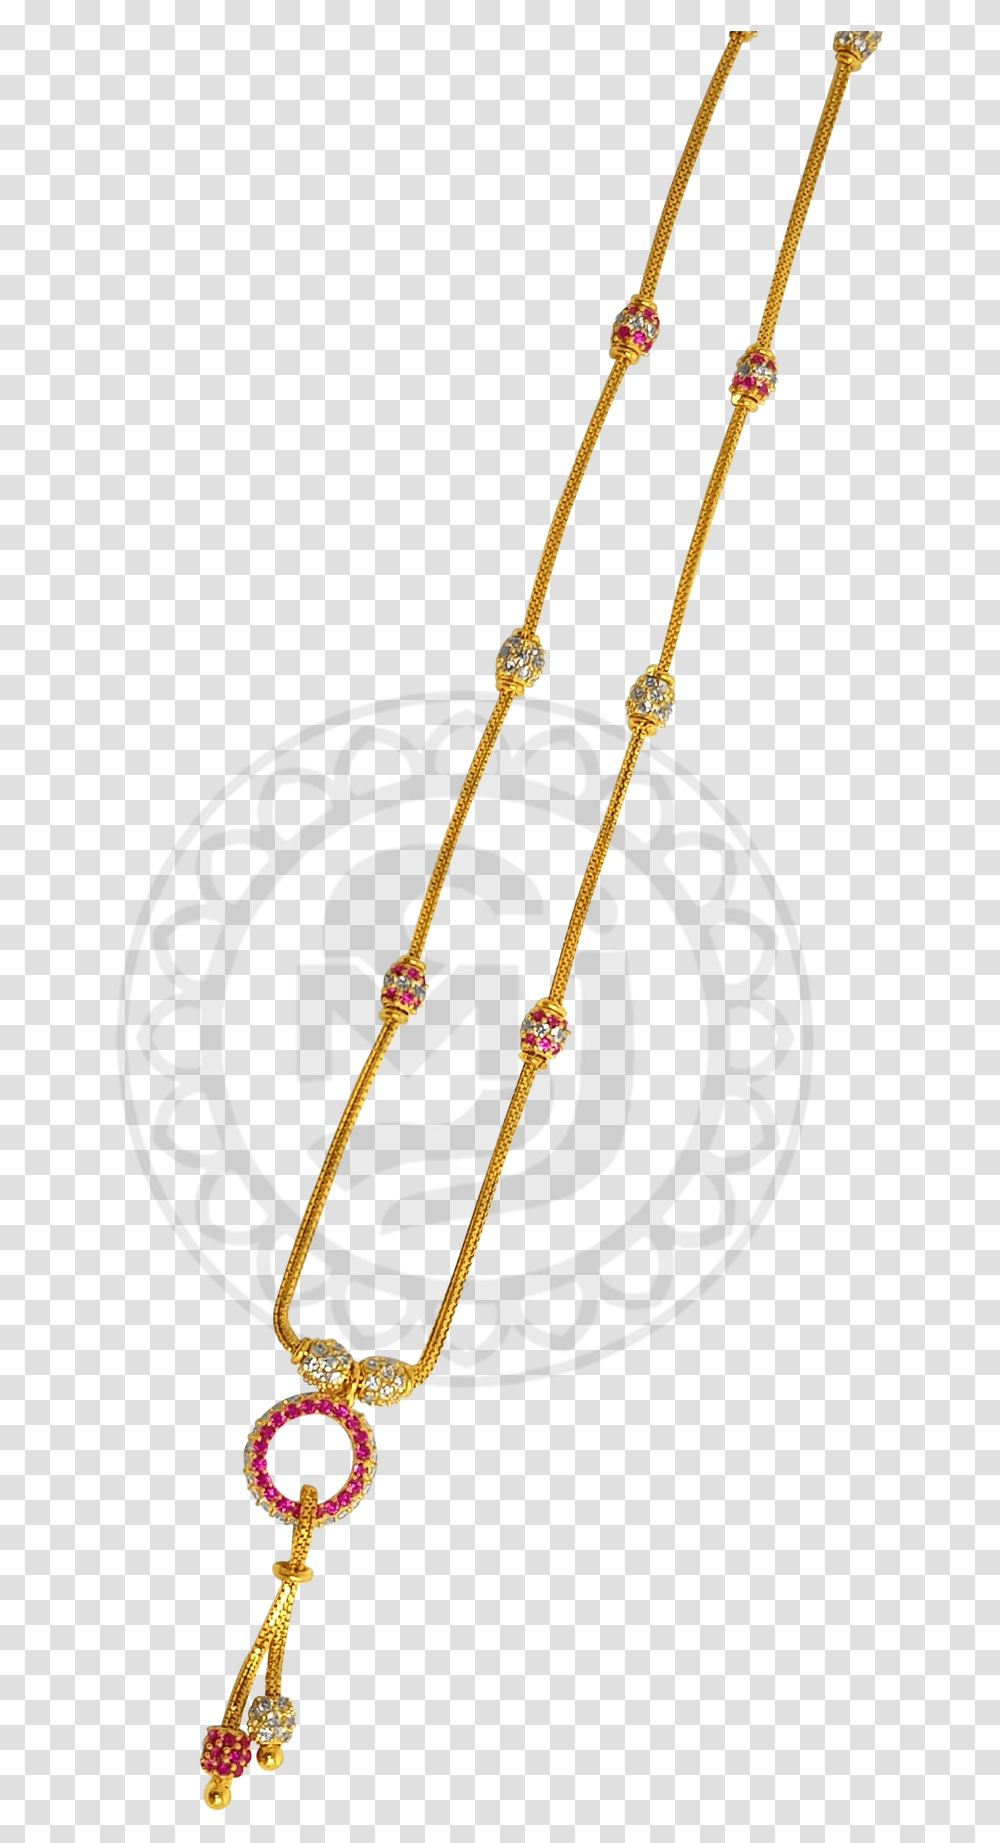 Download Hd Gold Chains 221225 Chain Image Illustration, Rope, Necklace, Jewelry, Accessories Transparent Png